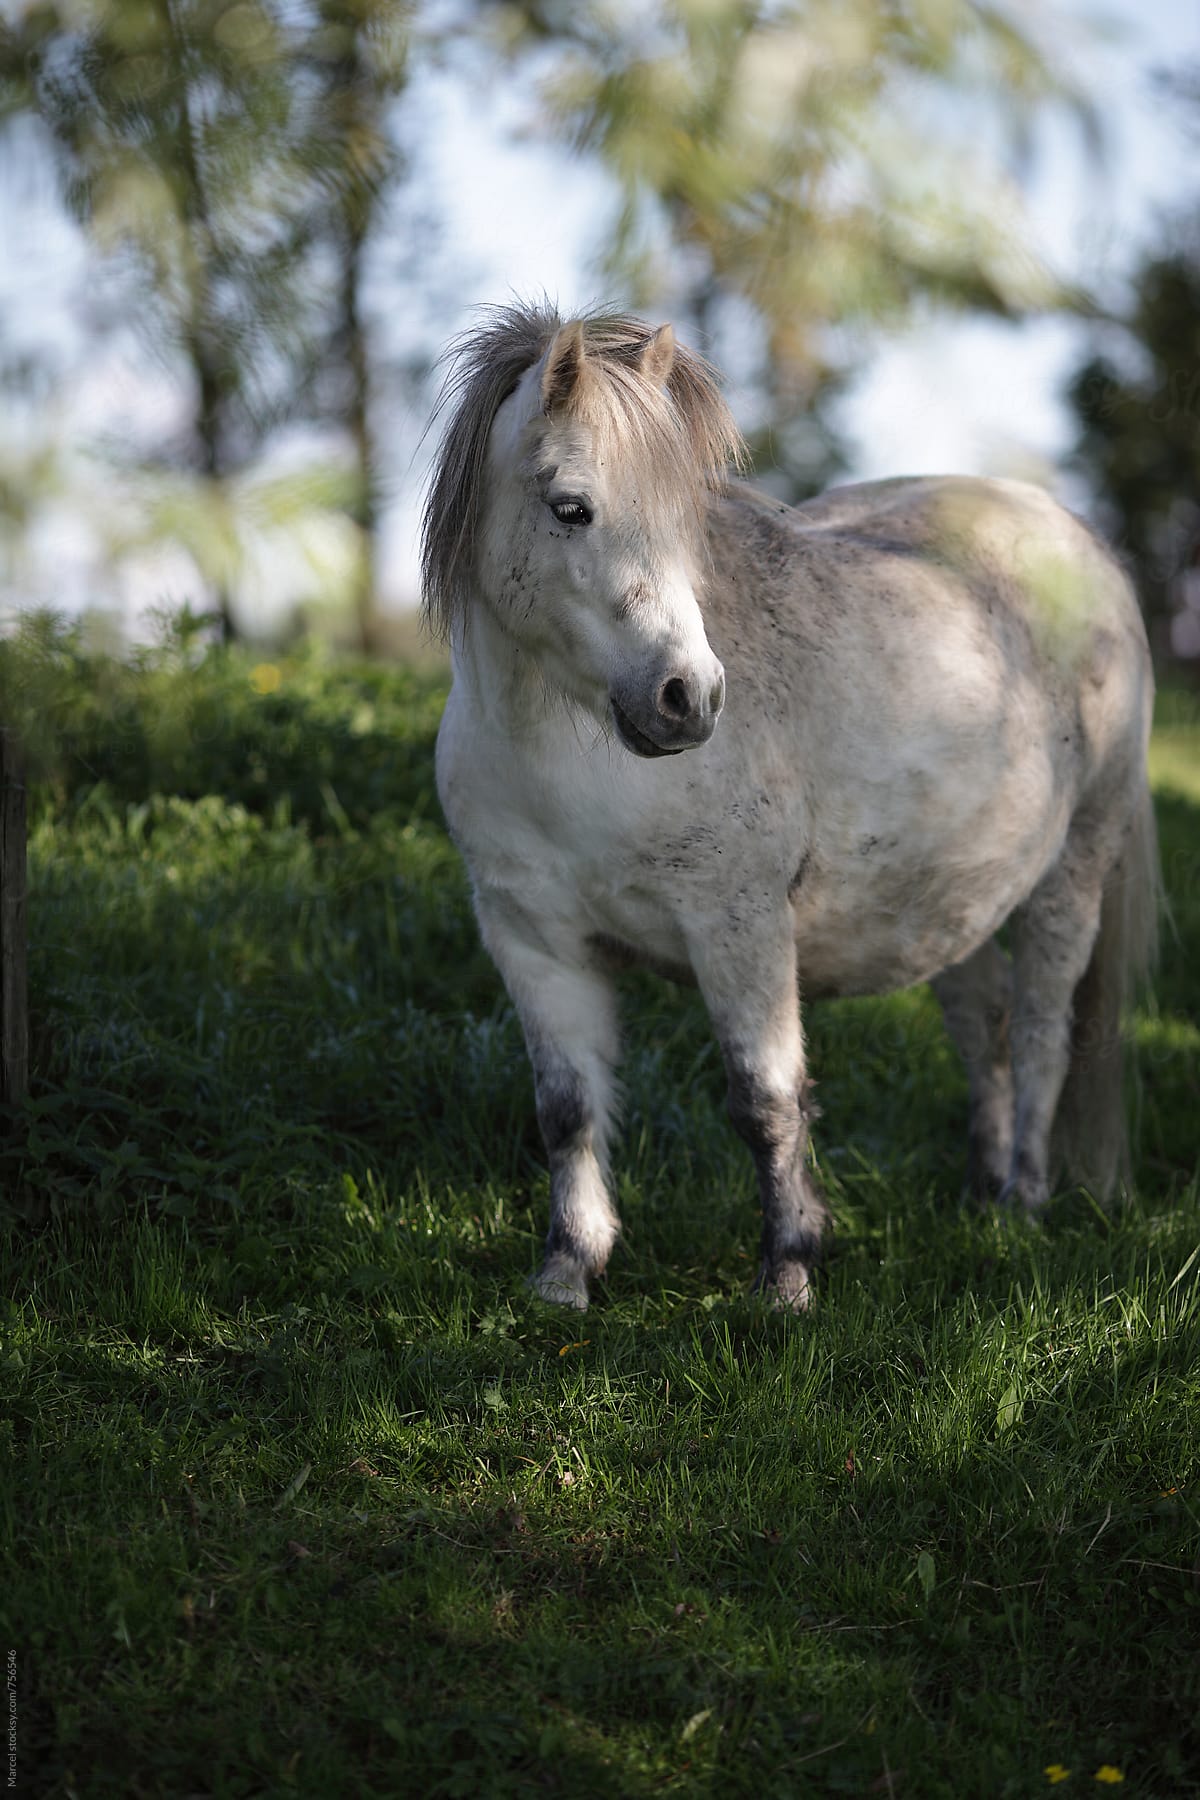 Pretty white pony horse standing in a field with trees